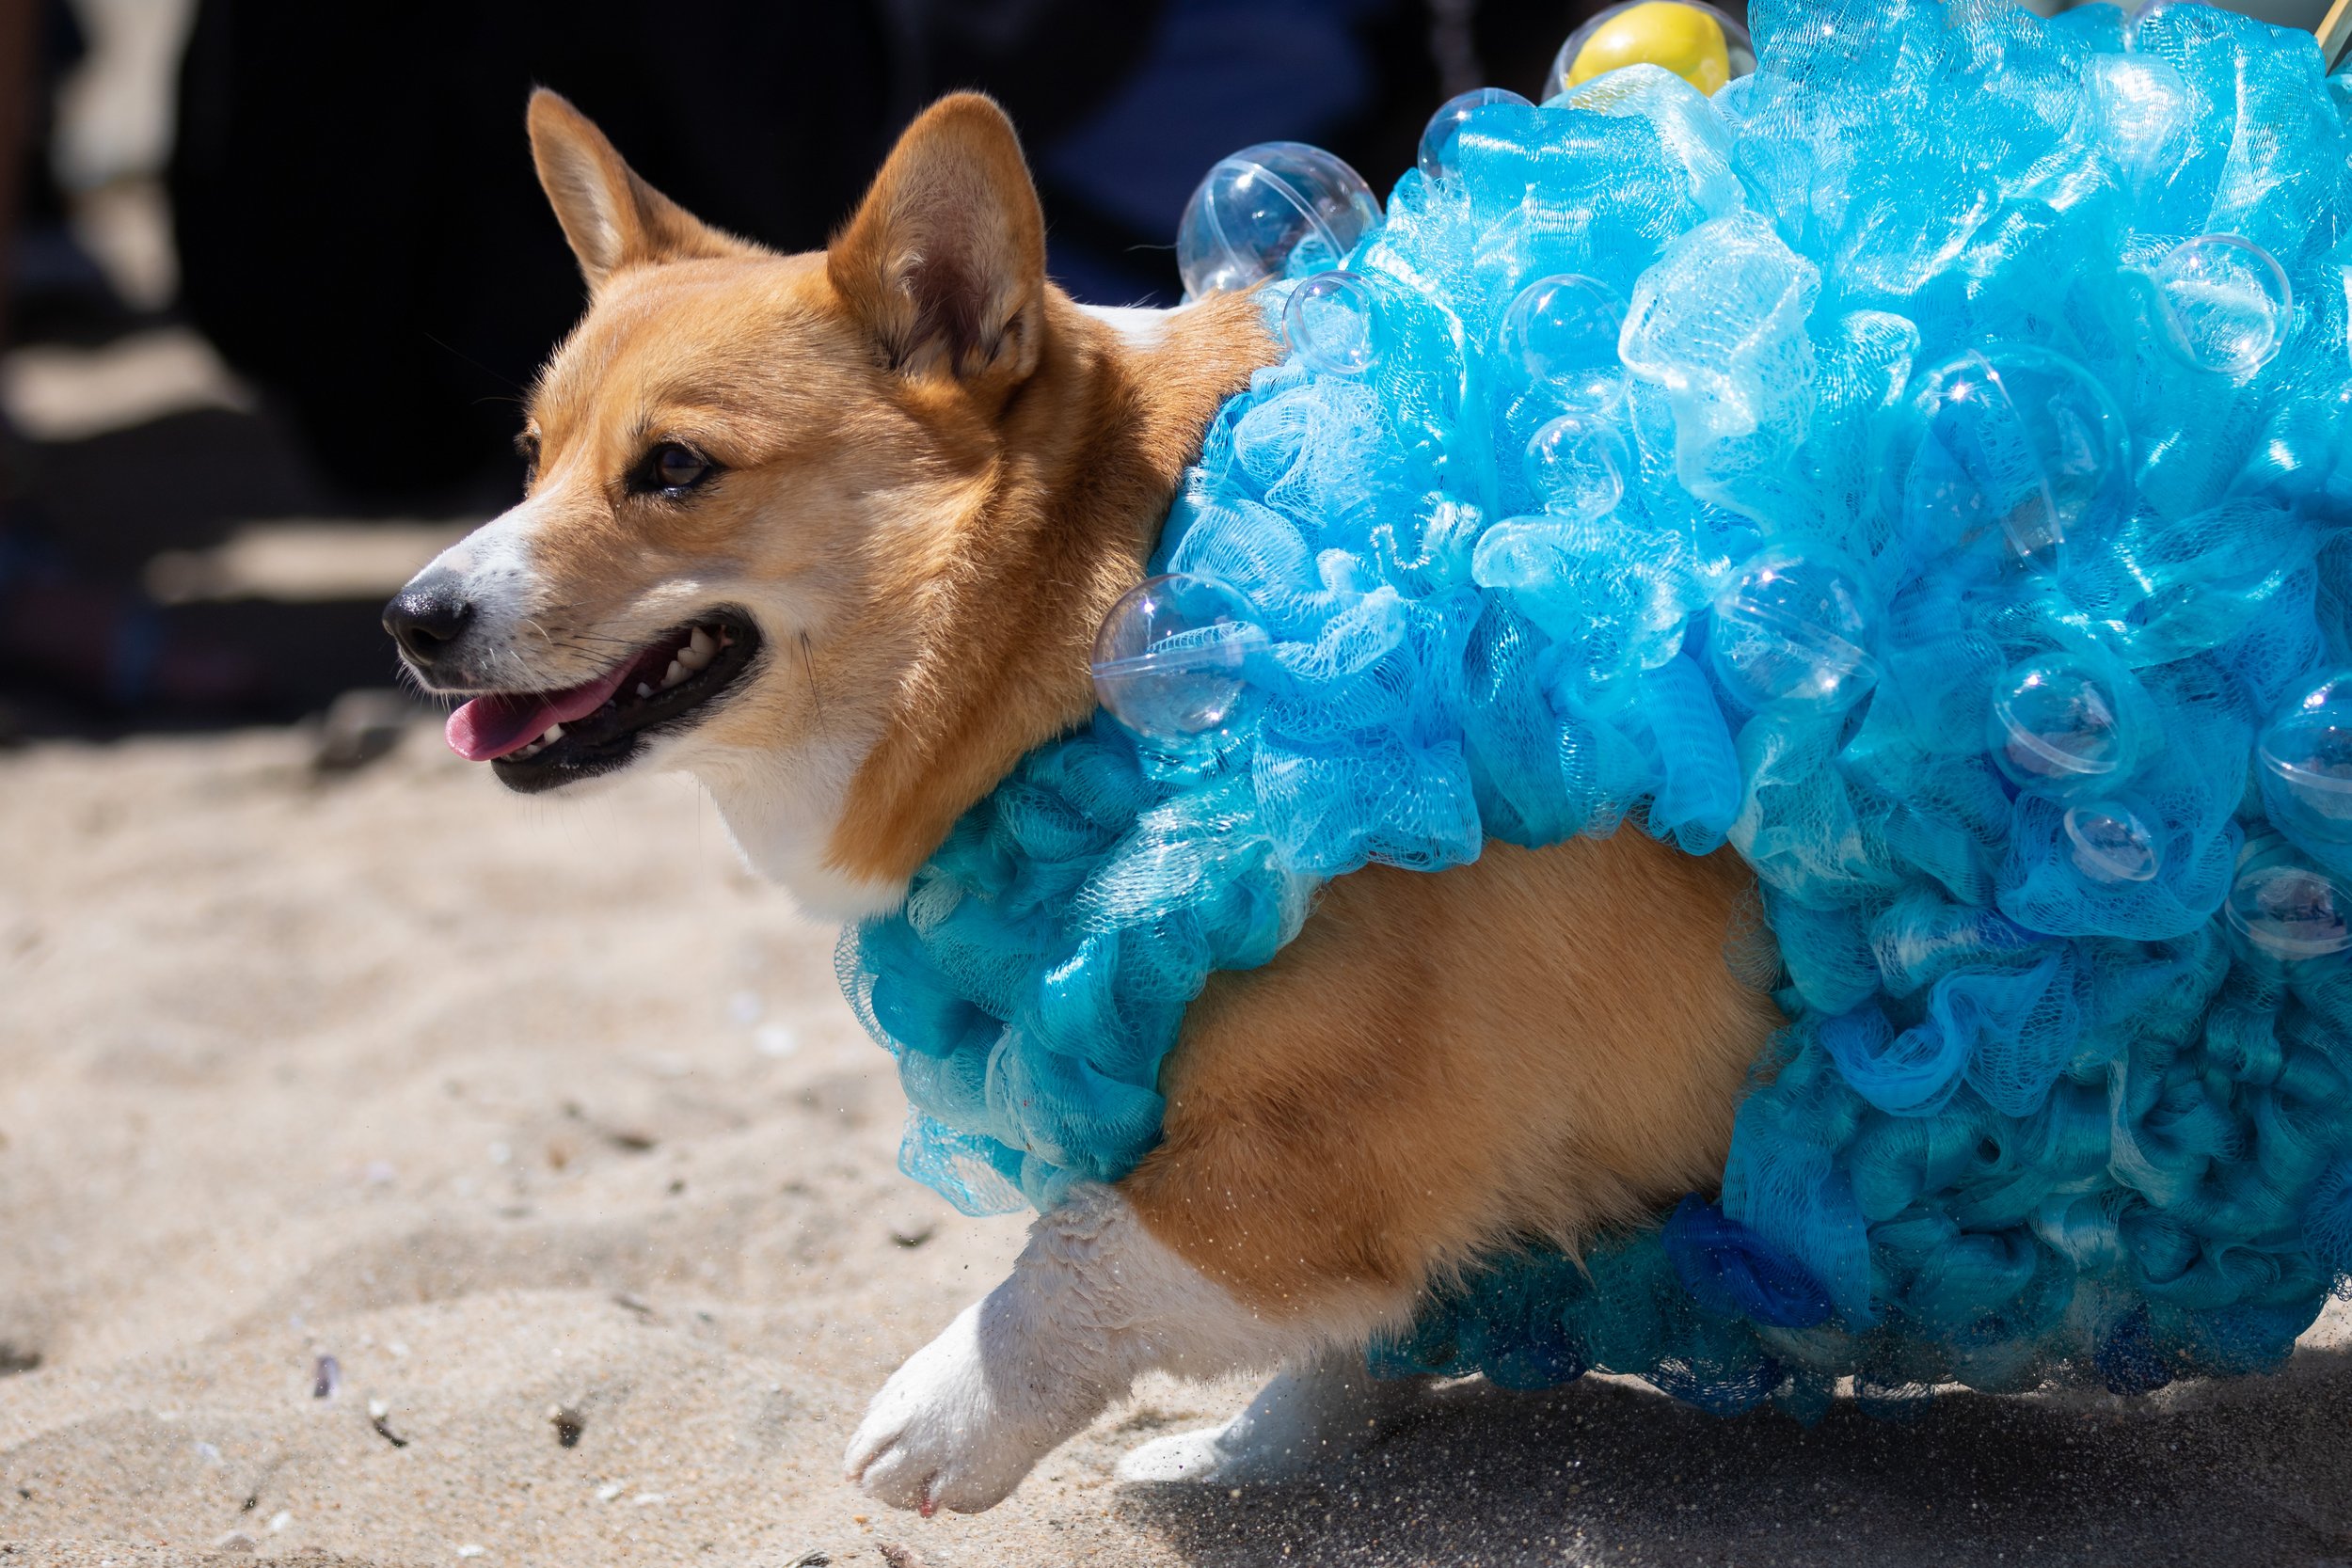  Mazi dressed as a loofah for the anything goes part of the Best Corgi Costume Contest during Corgi Beach Day at Huntington Dog Beach, Huntington Beach, Calif., on Saturday, April 1, 2023. There were over a thousand people in attendance with over 100